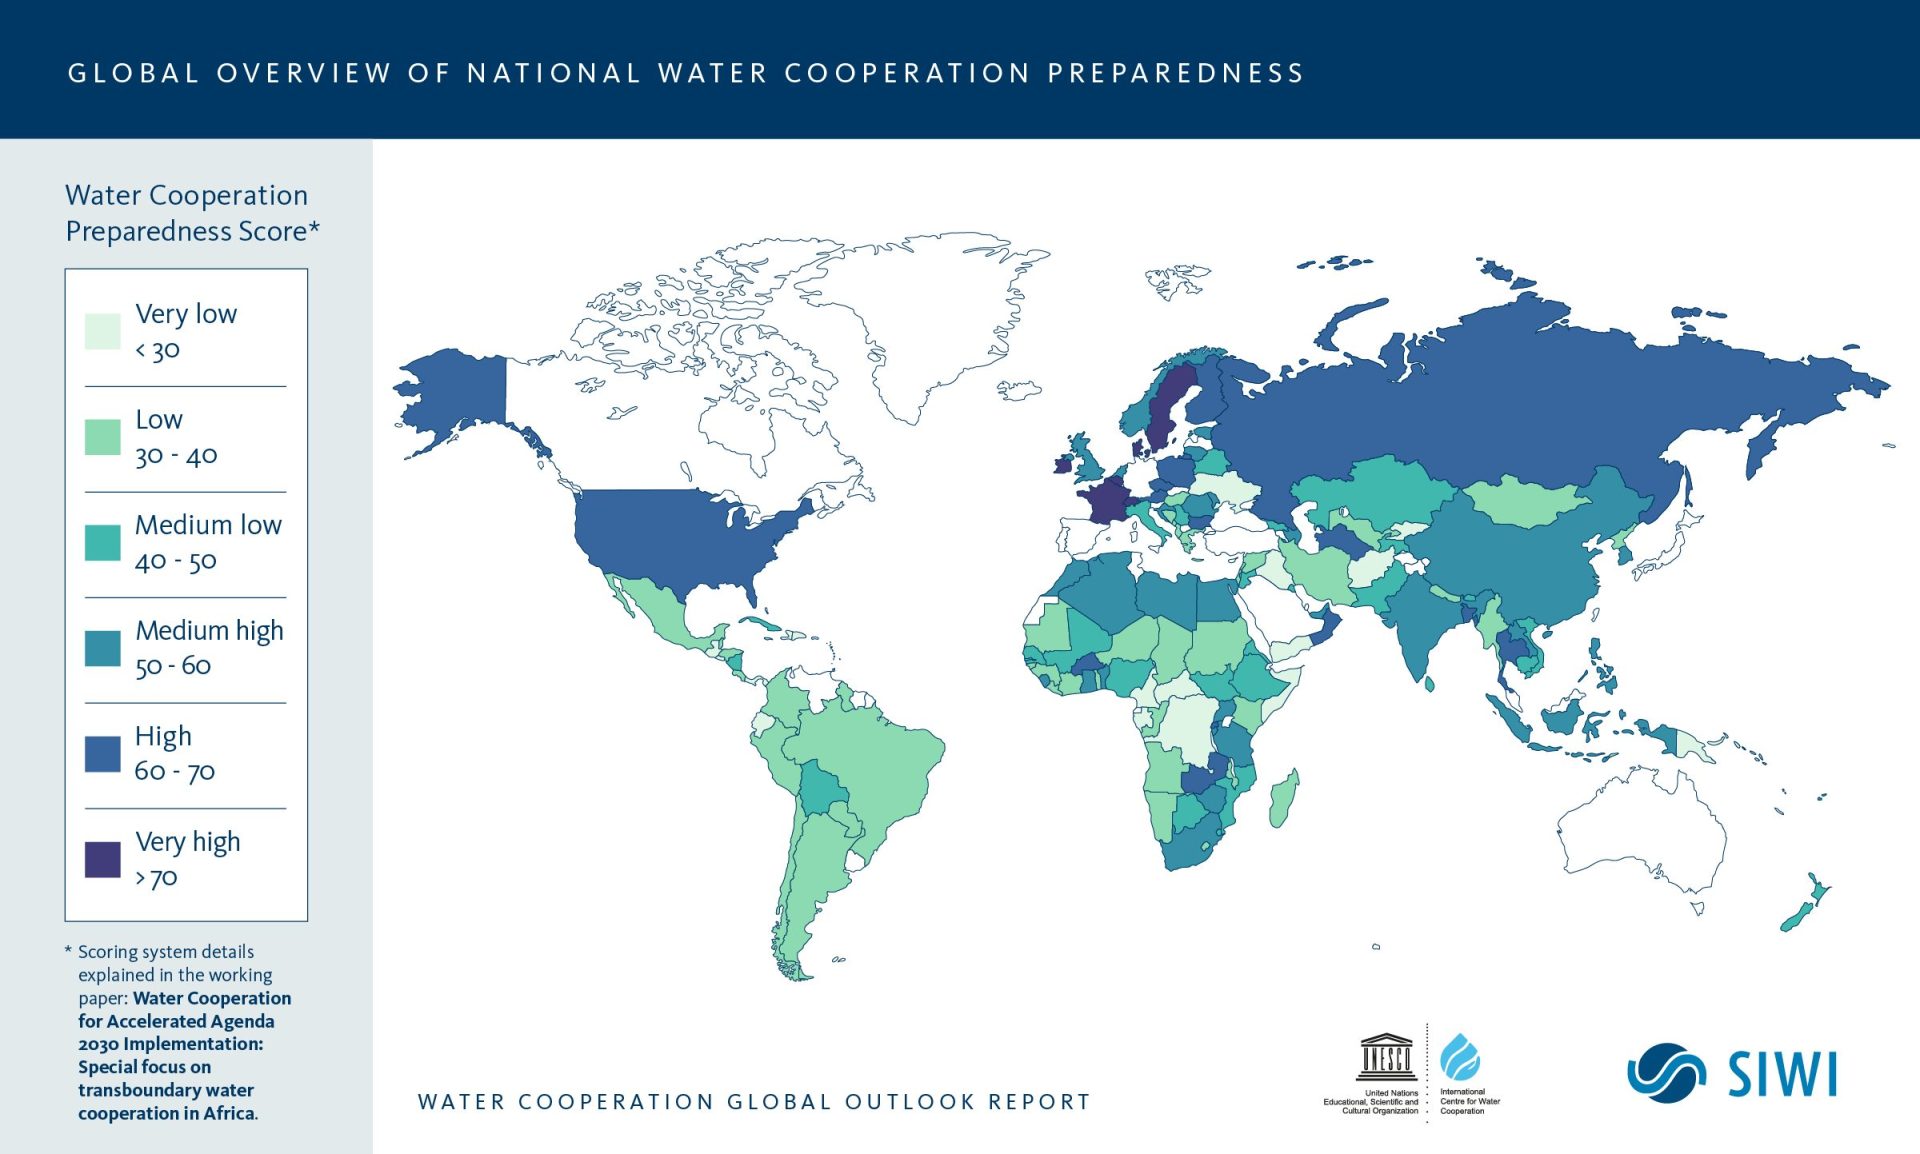 Global overview map of national water cooperation preparedness